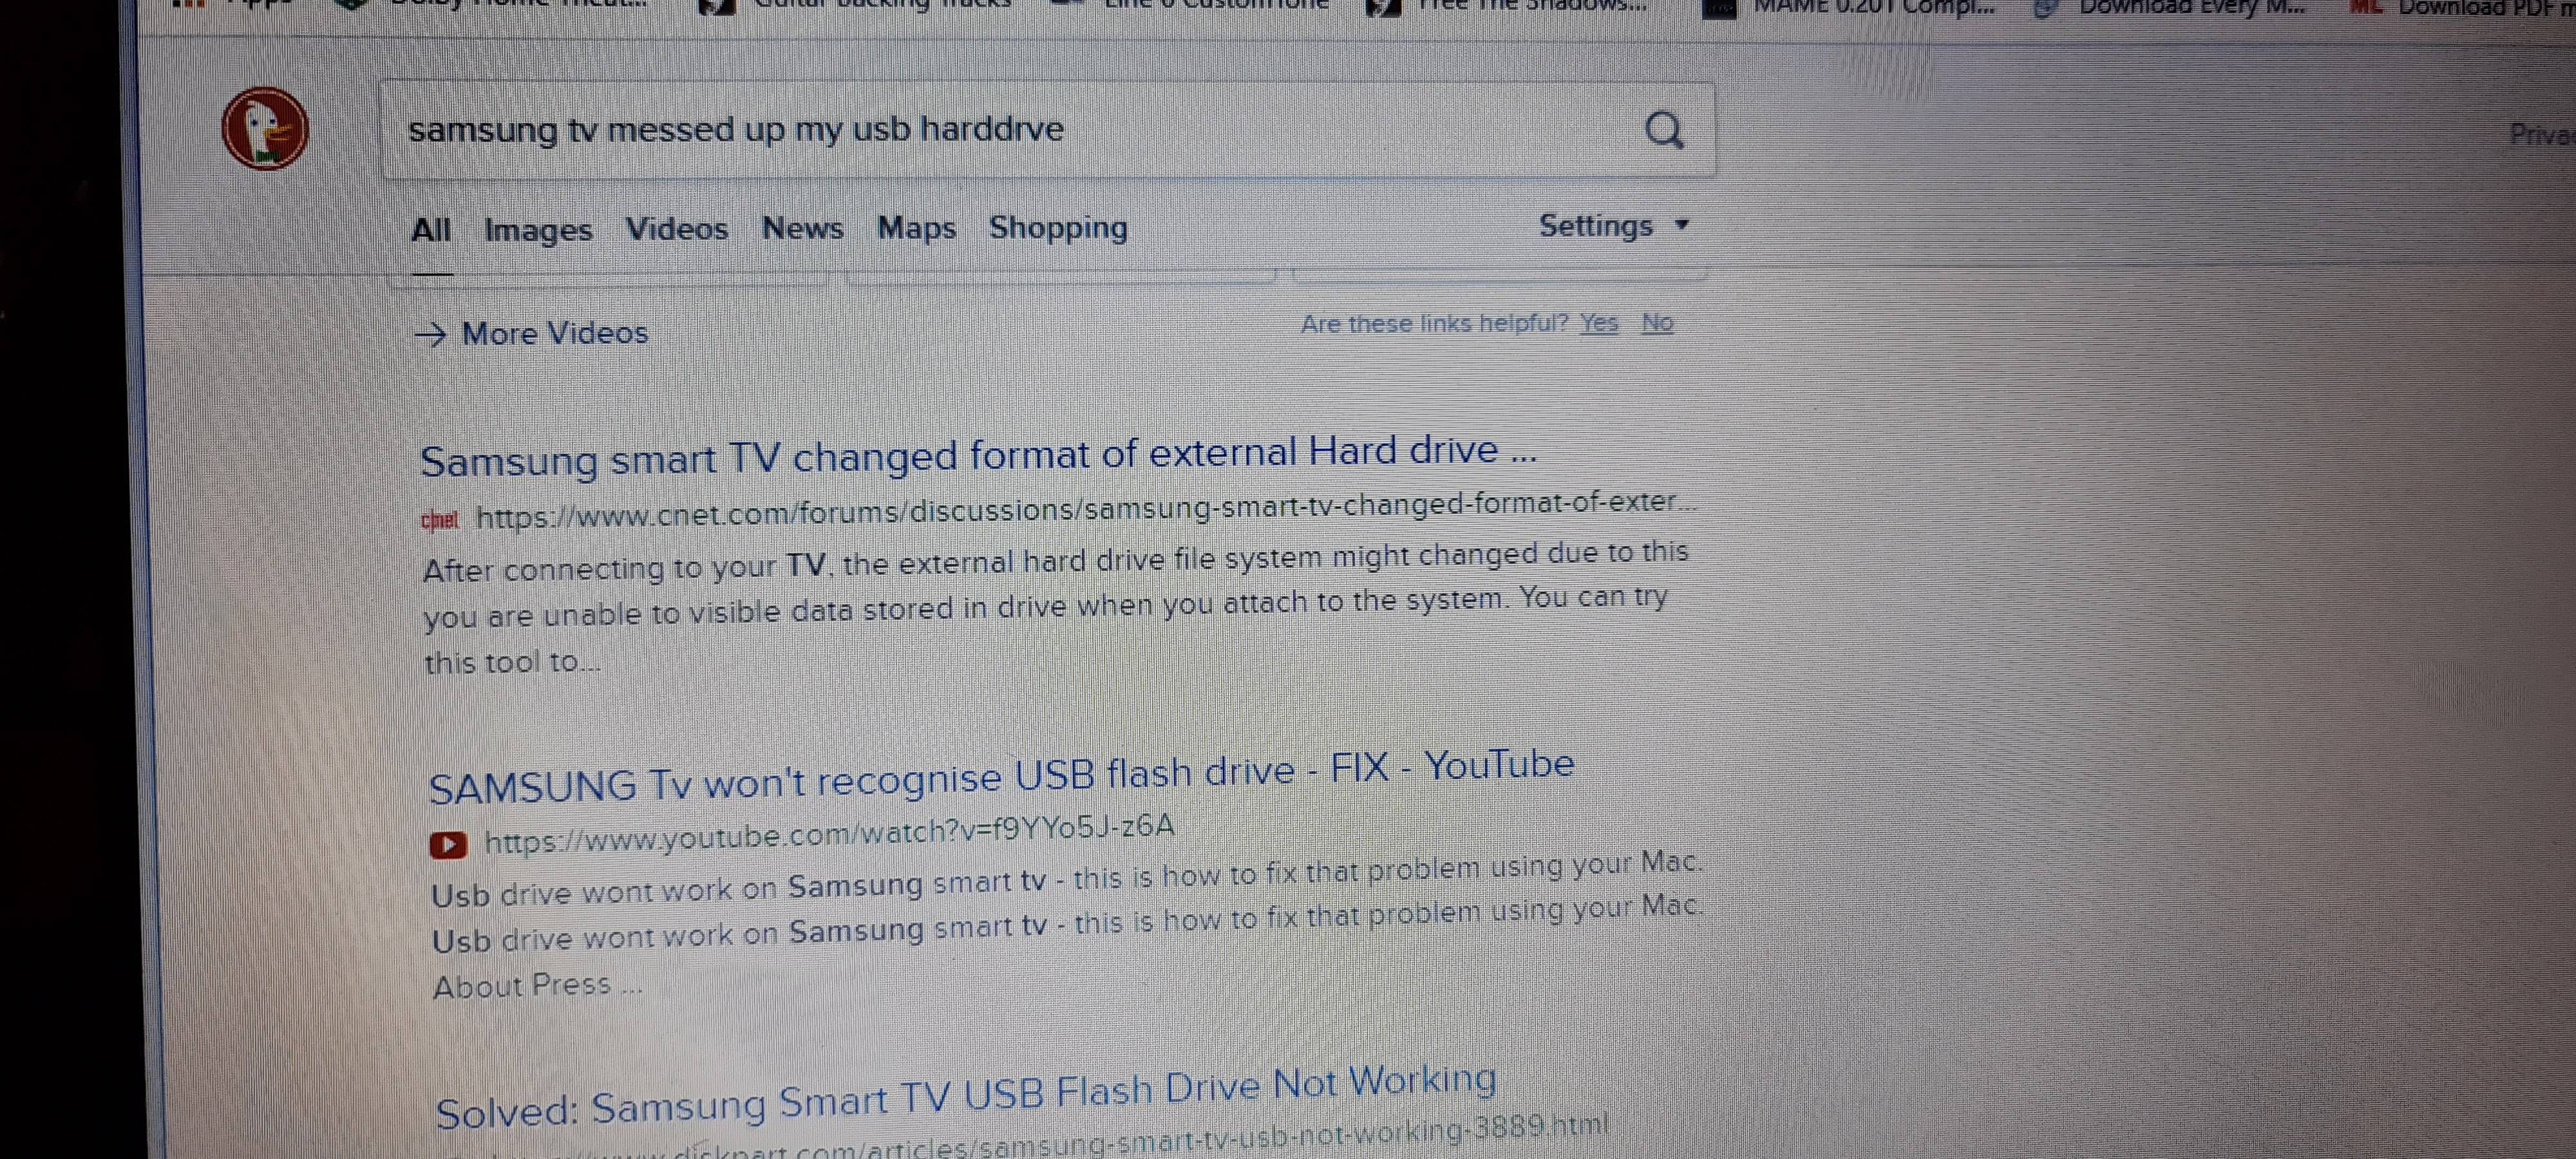 Solved: Samsung TV messed up my USB disk - after disconnecting disk is no  longer readable - Page 2 - Samsung Community